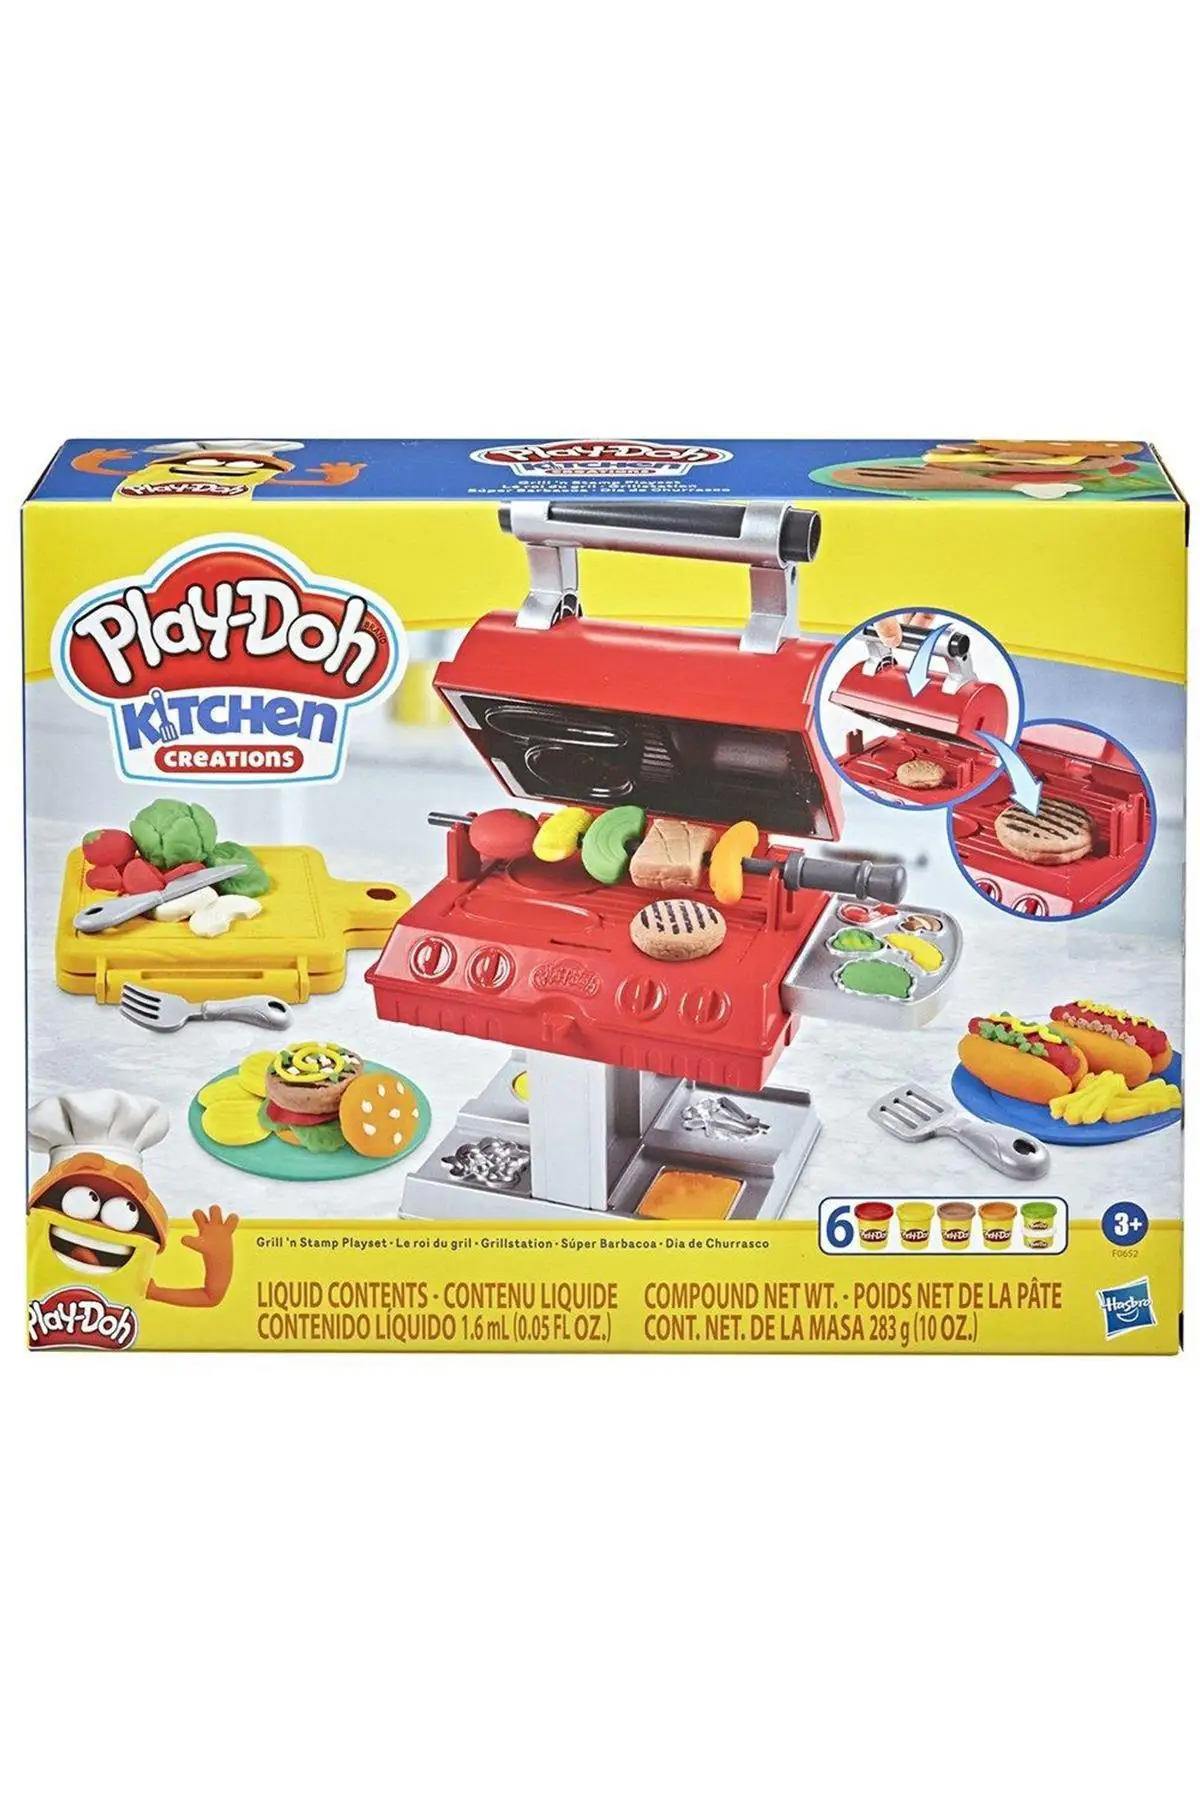 Play Doh For 1 Year Old Shop Sale, 70% OFF | connect-summary.com